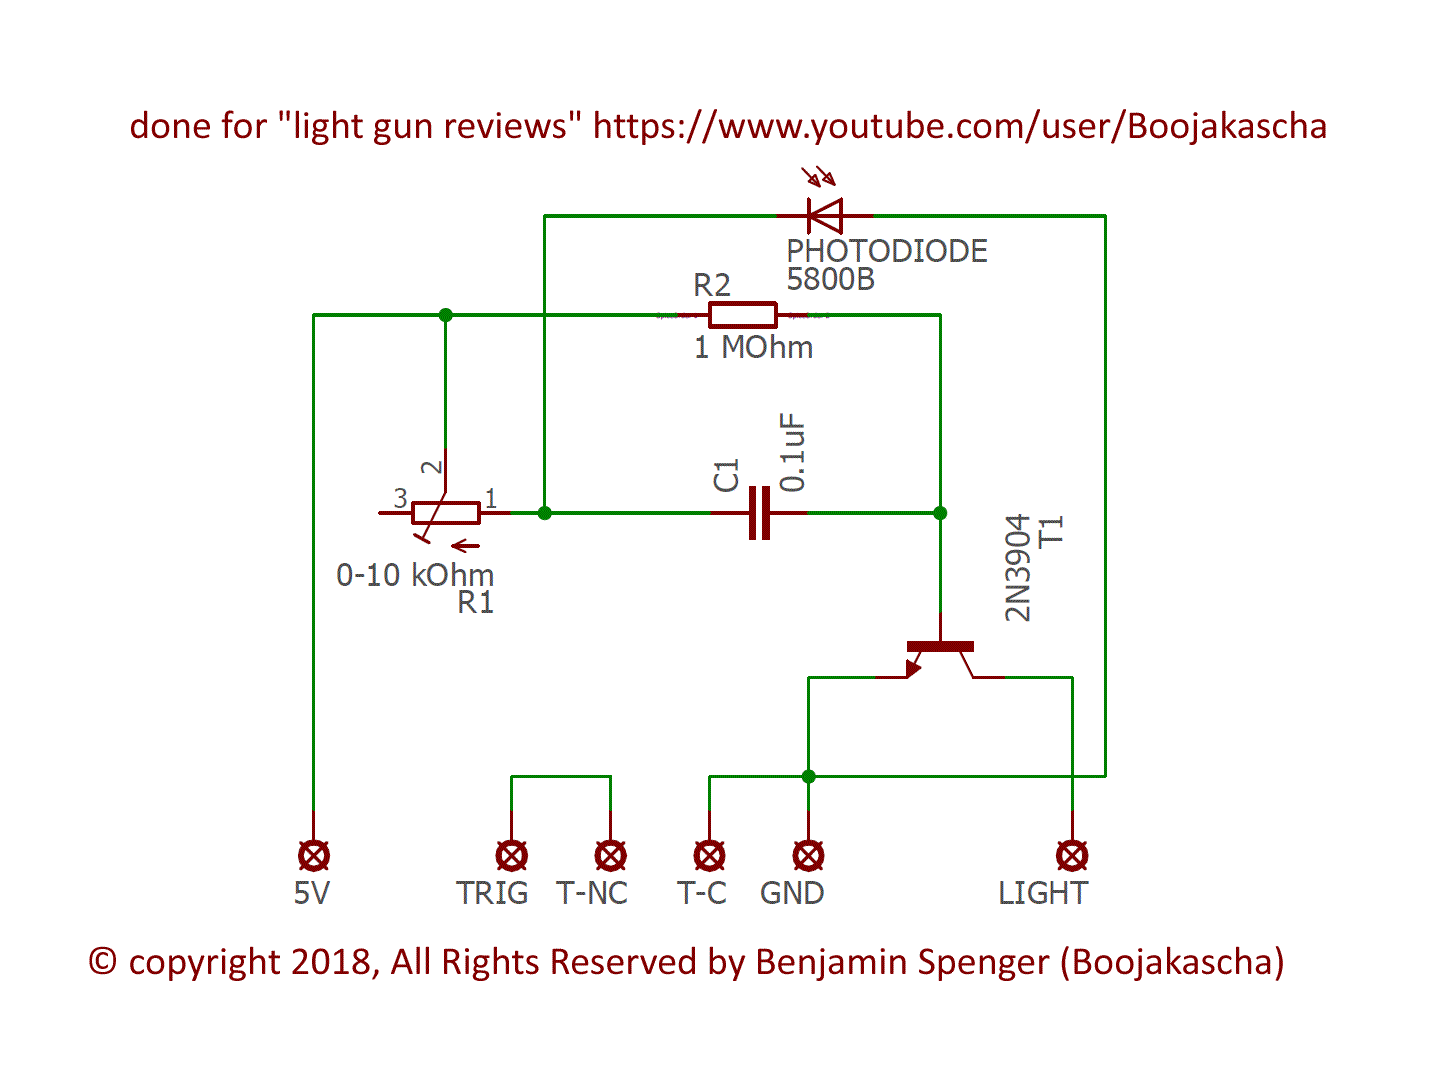 DIY scheme of the LCD compatible NES/FC ligth gun